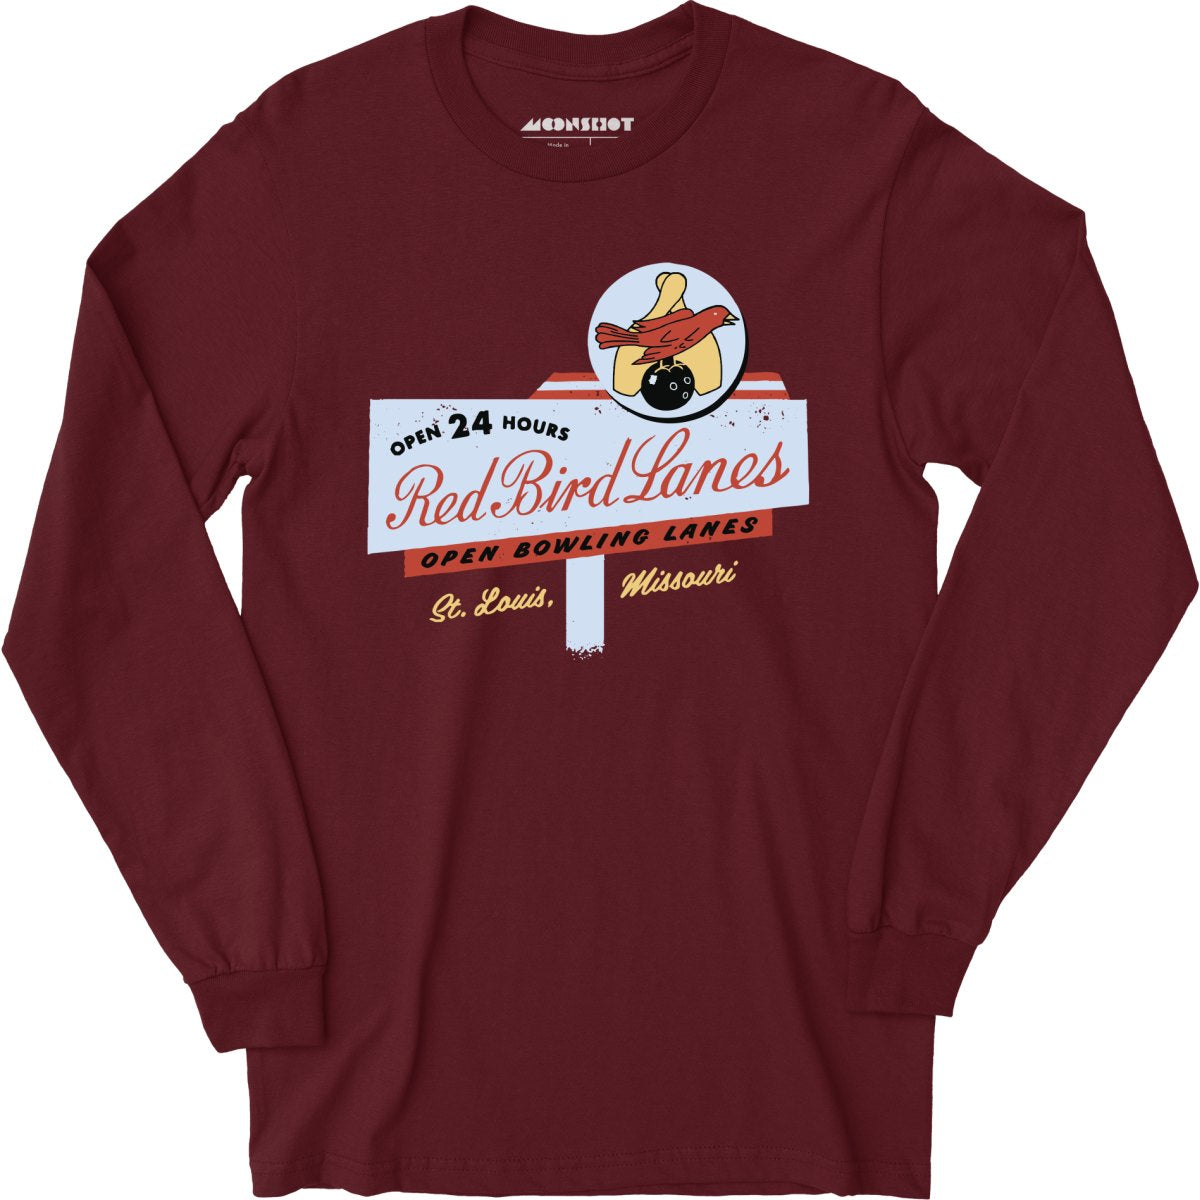 Red Bird Lanes v2 - St. Louis, MO - Vintage Bowling Alley - Long Sleeve T-Shirt